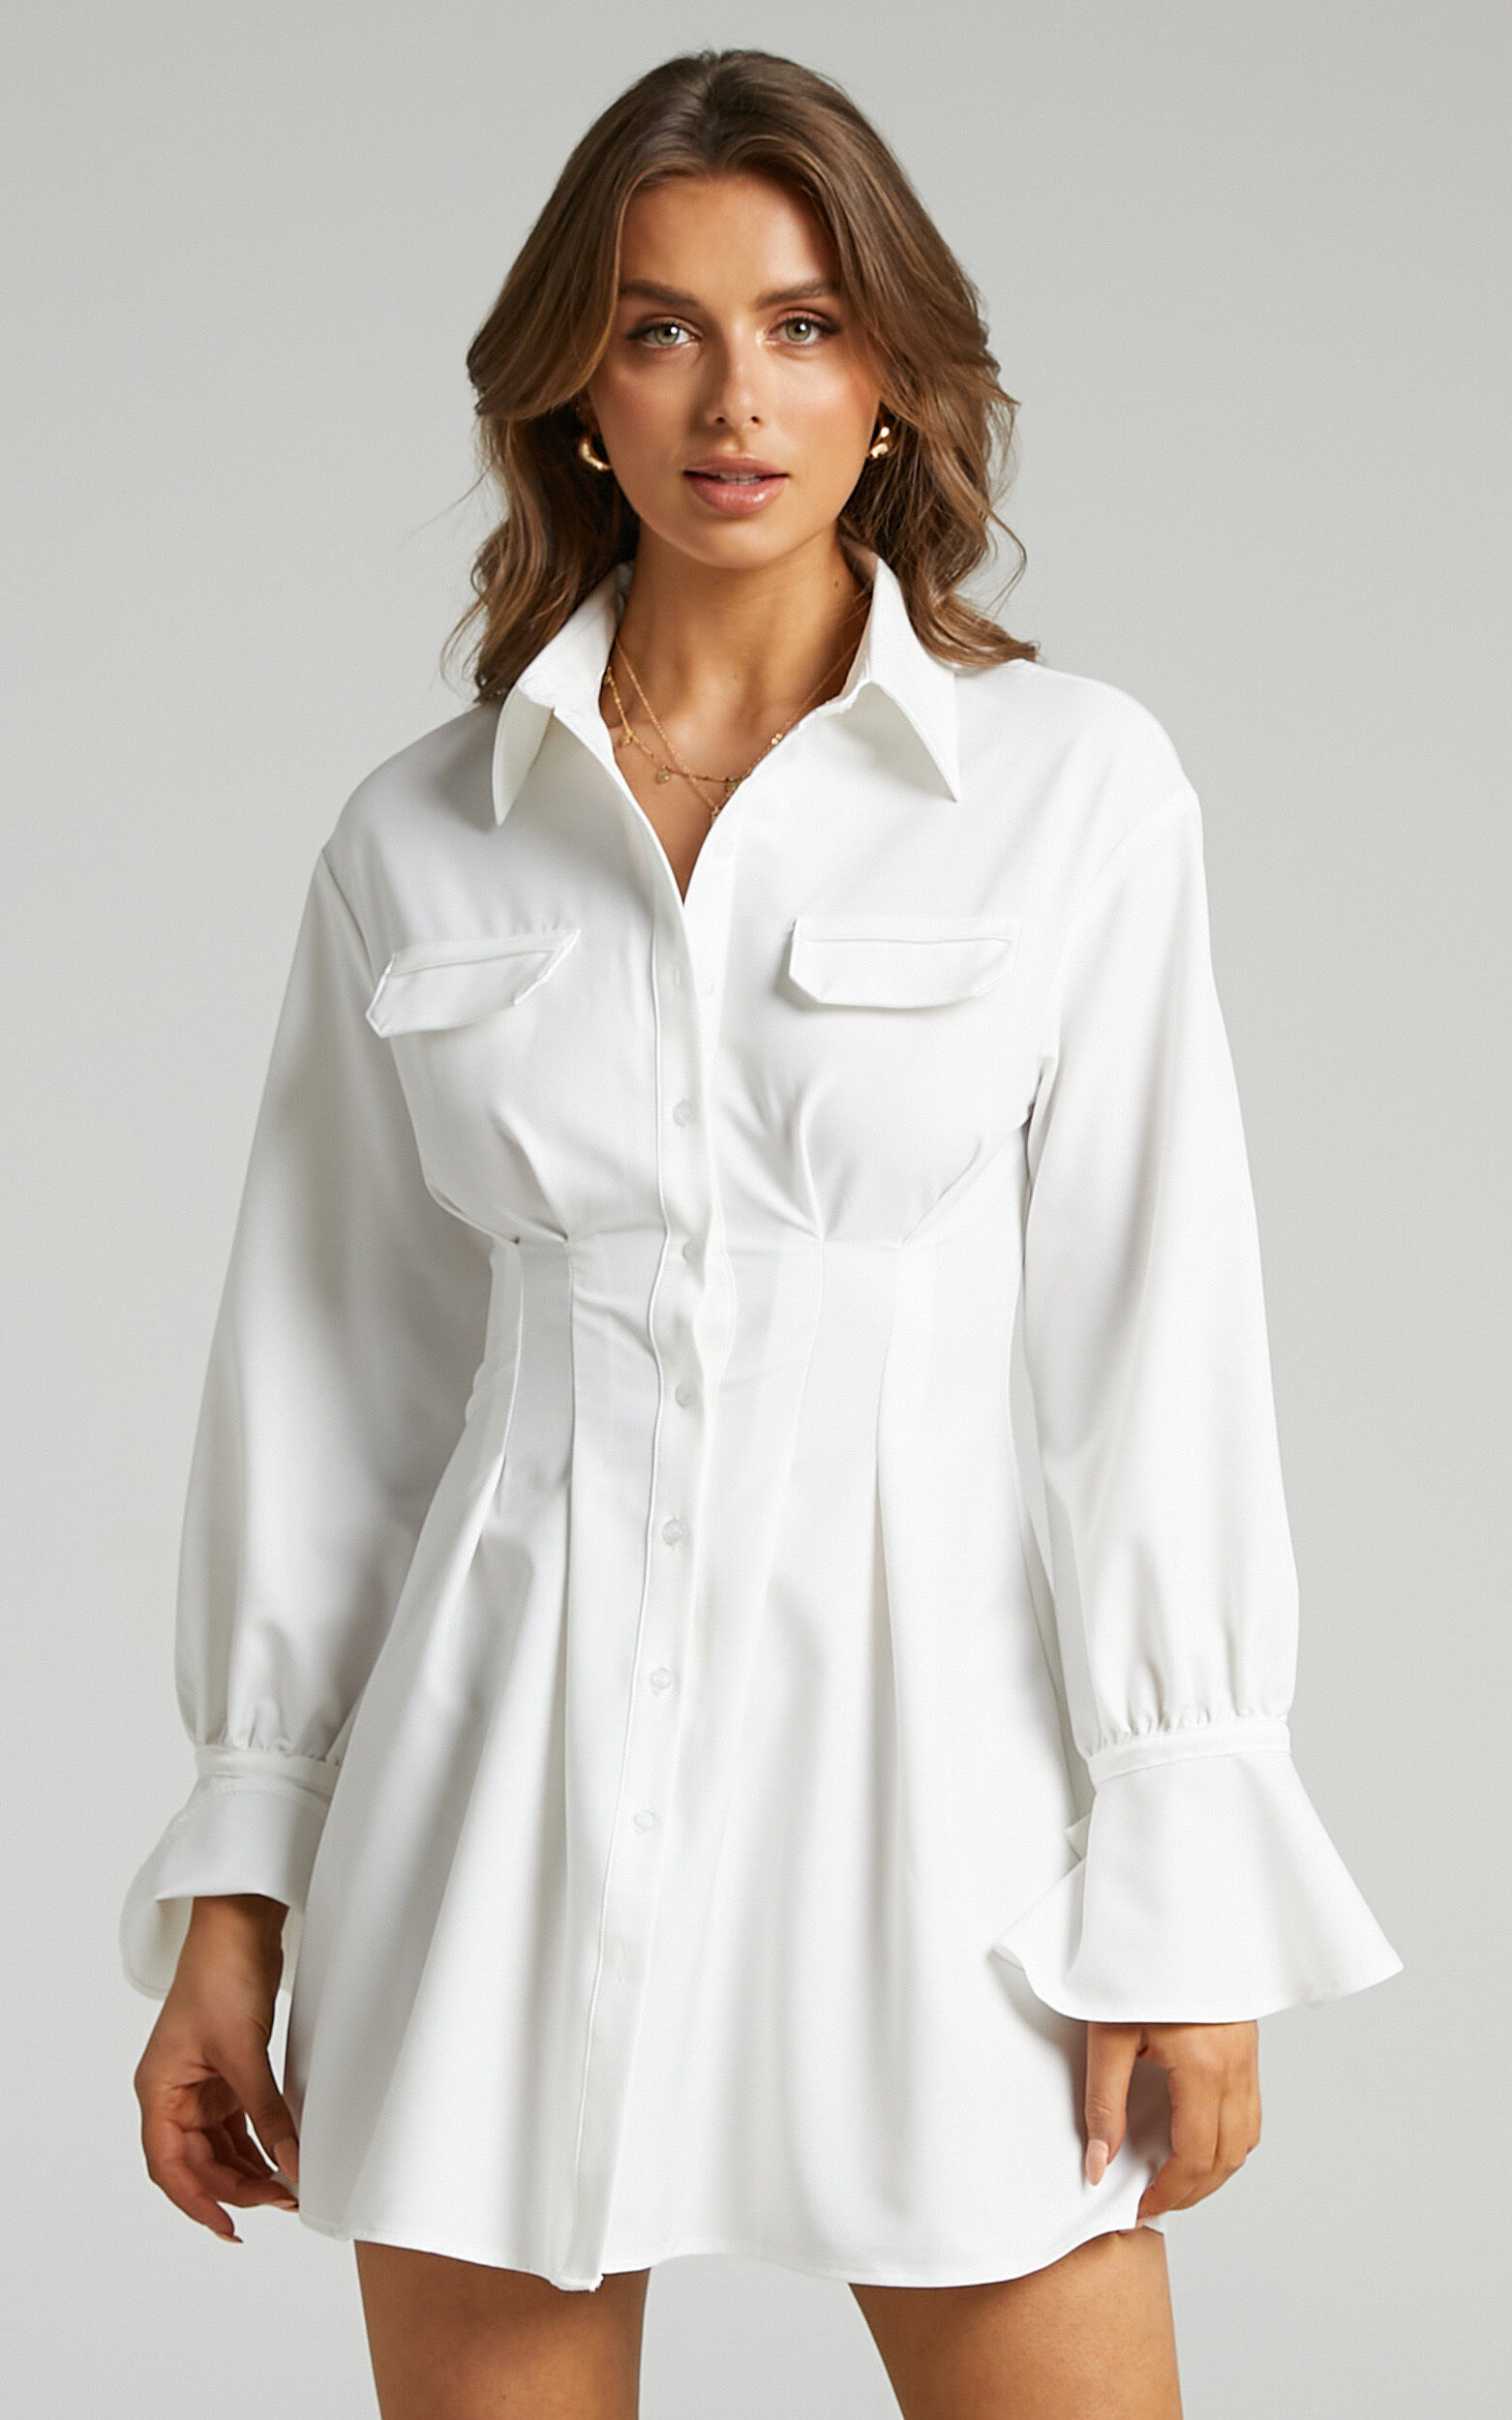 Romi Cuffed Long Sleeve Shirt Dress with Cinched Waist in White - 06, WHT1, super-hi-res image number null